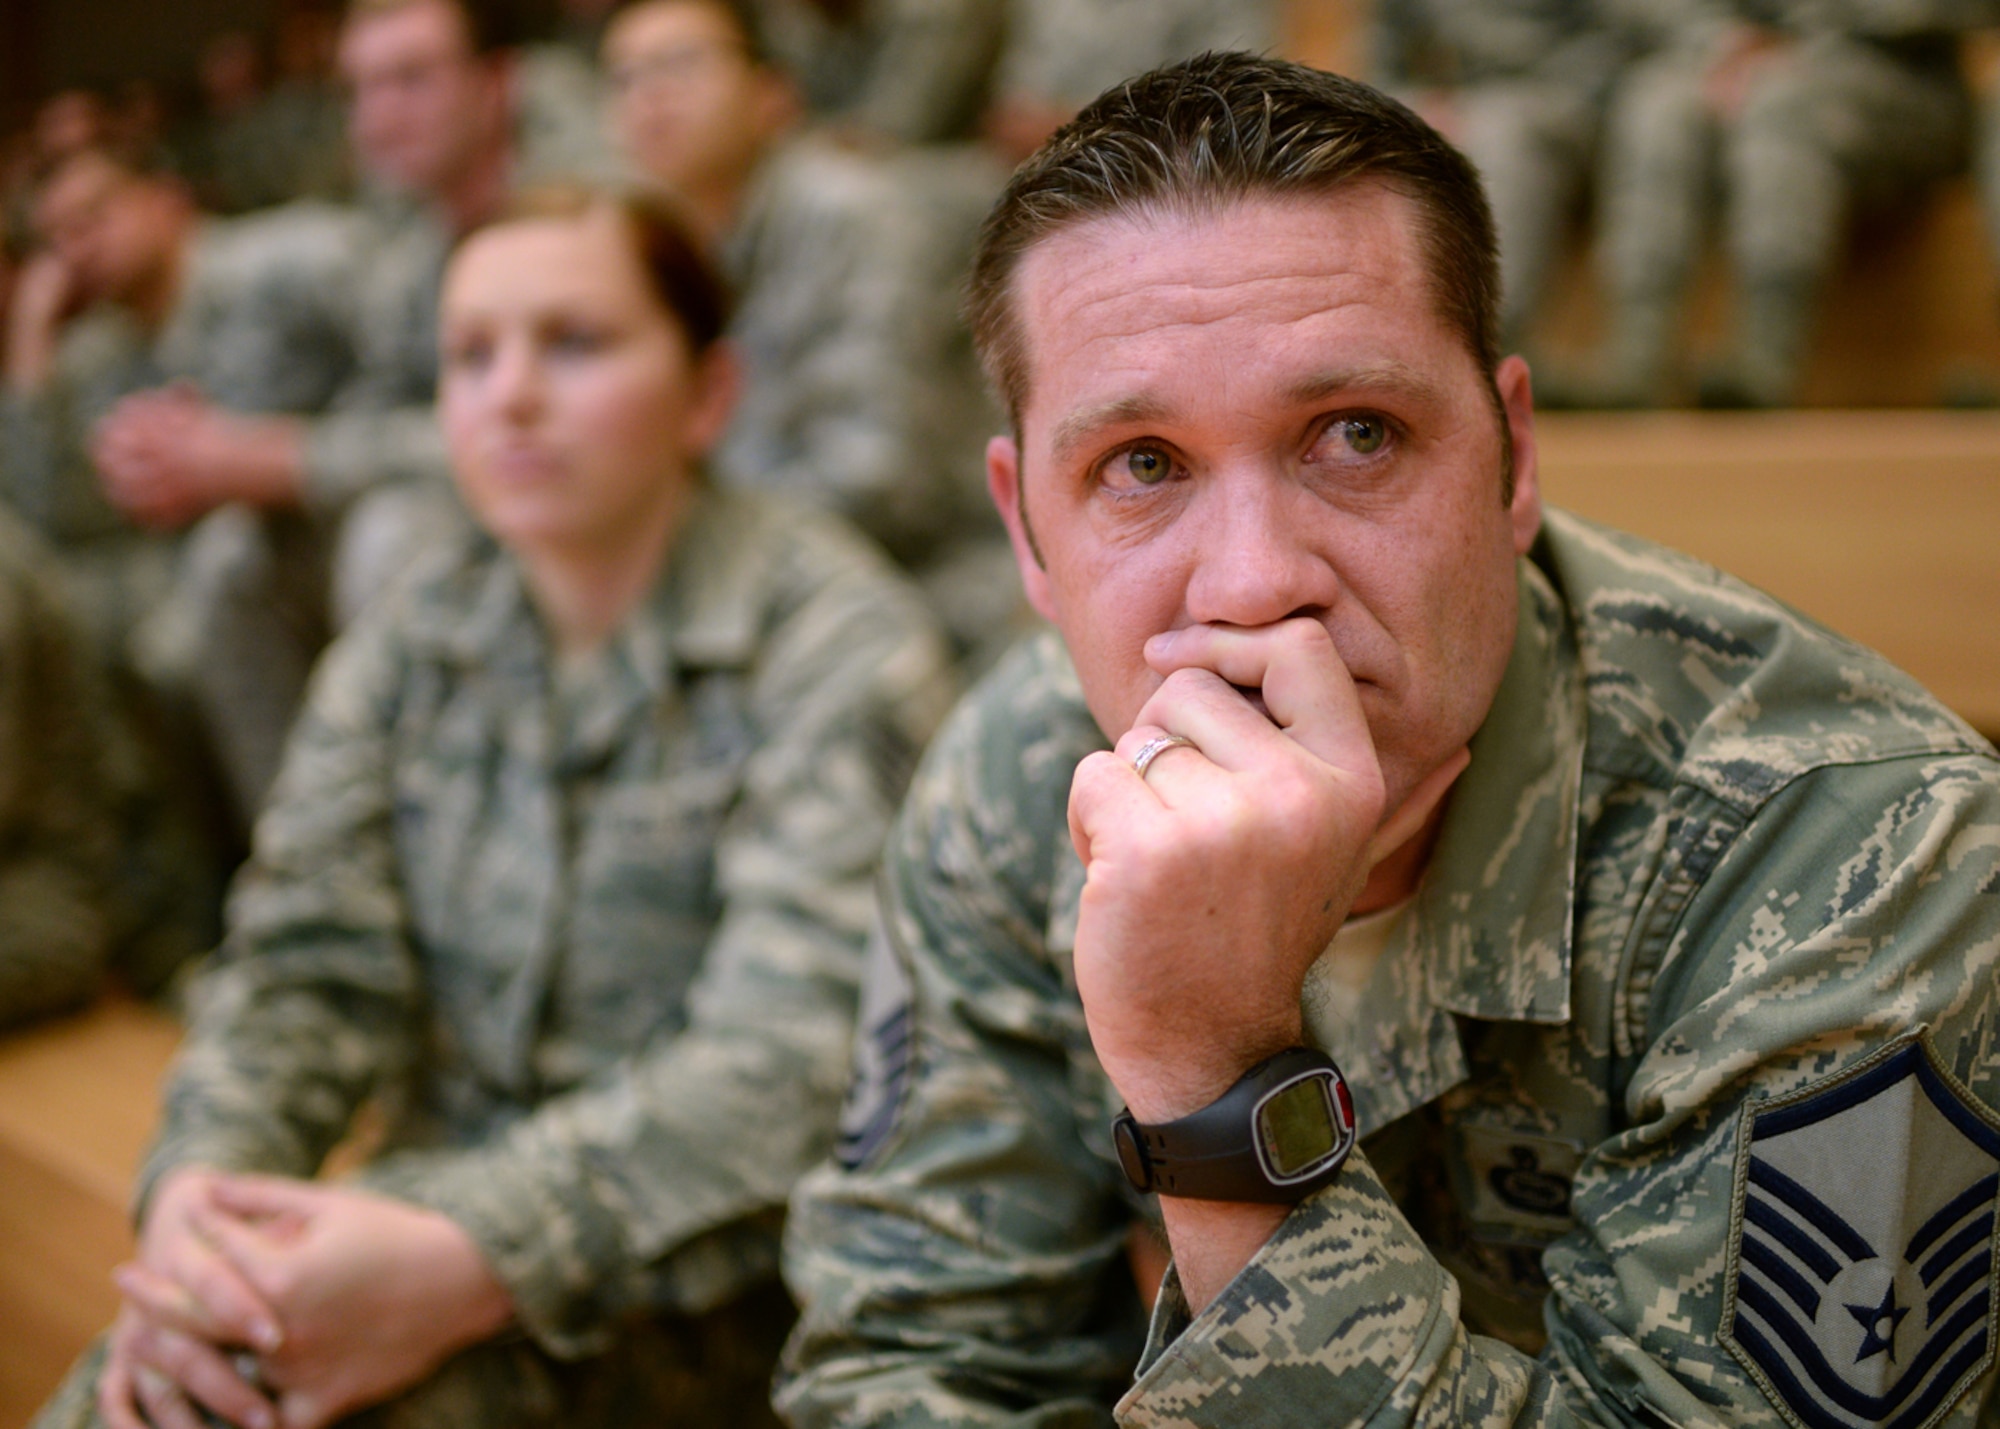 U.S. Air Force Master Sgt. Mark Miller, 52nd Operations Support Squadron and native of Grand Prairie, Texas, listens to base leadership during a mass briefing in the Skelton Memorial Fitness Center at Spangdahlem Air Base, Germany, March 26, 2014. The 52nd Fighter Wing leadership conducts briefings, or commander’s calls, throughout the year to inform Airmen of events such as upcoming base construction projects or force reshaping. (U.S. Air Force photo by Staff Sgt. Daryl Knee/Released)